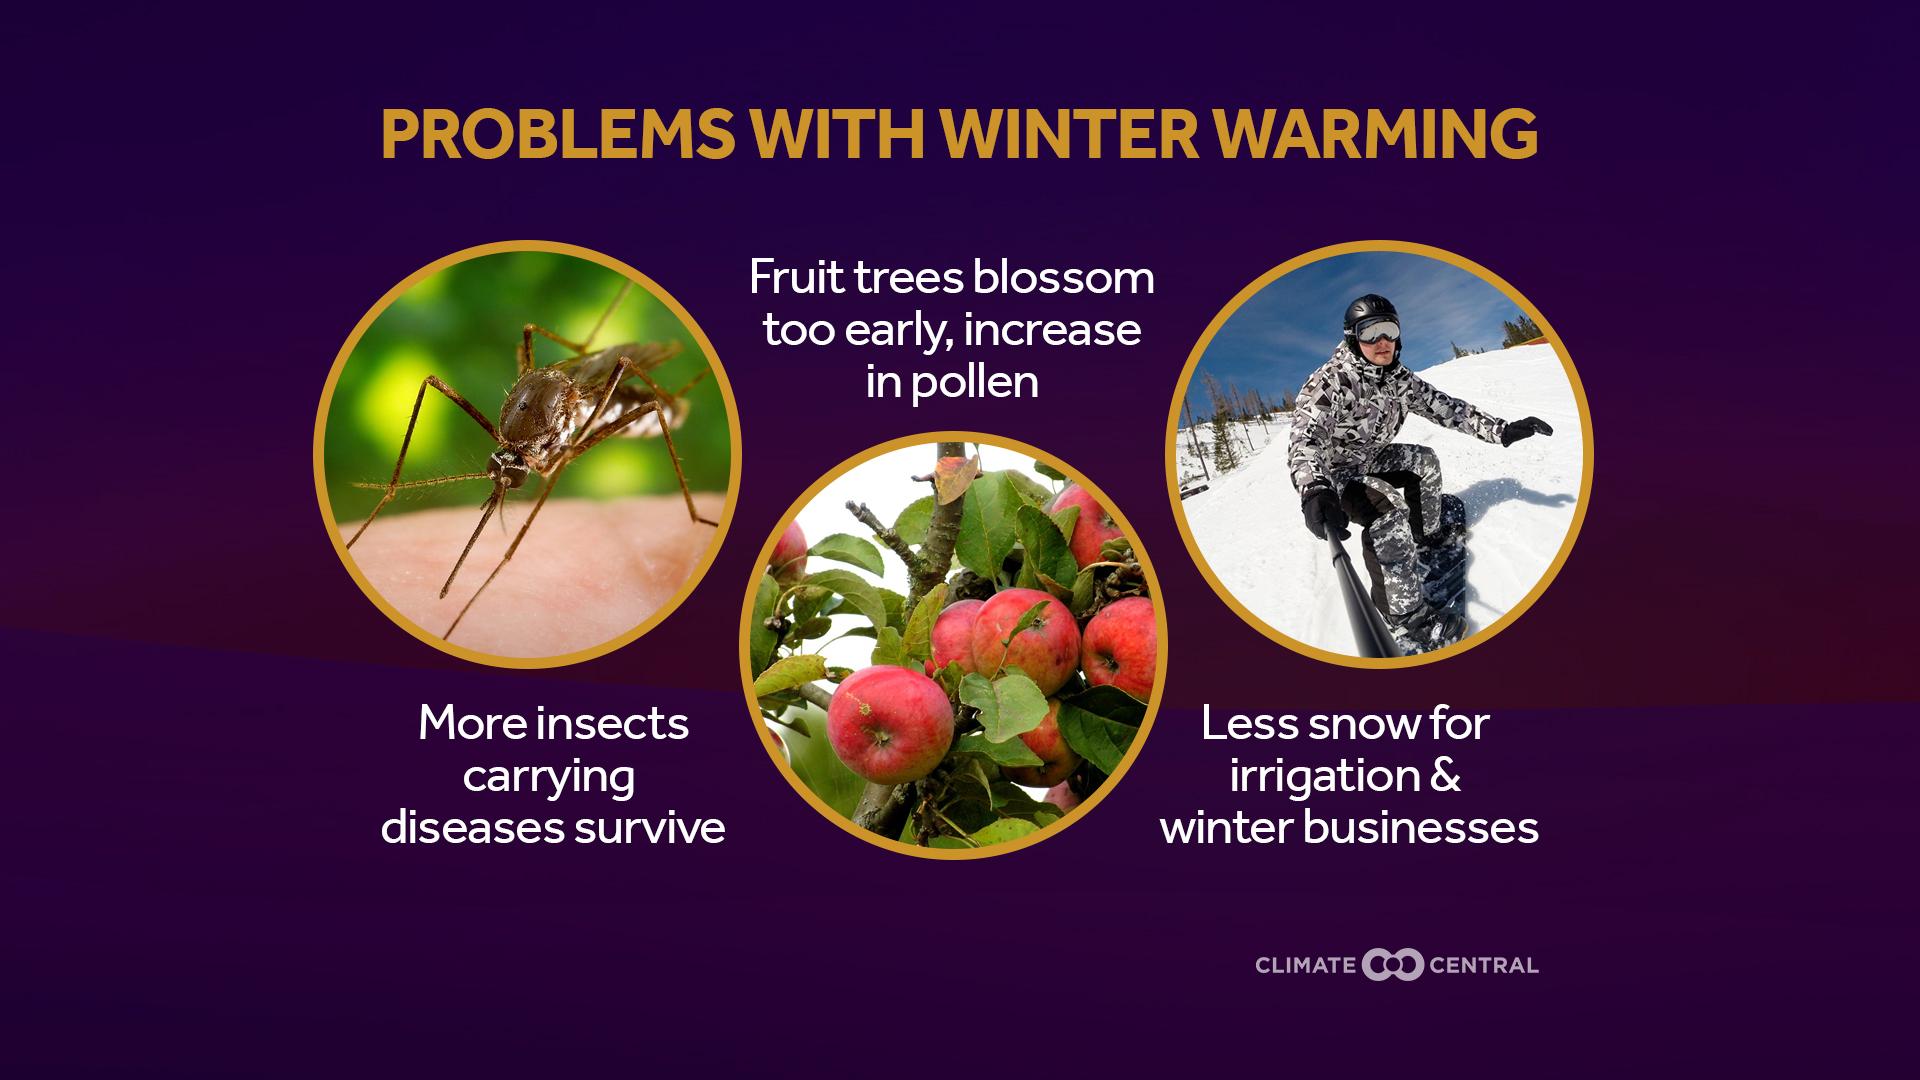 The Problems With Winter Warming